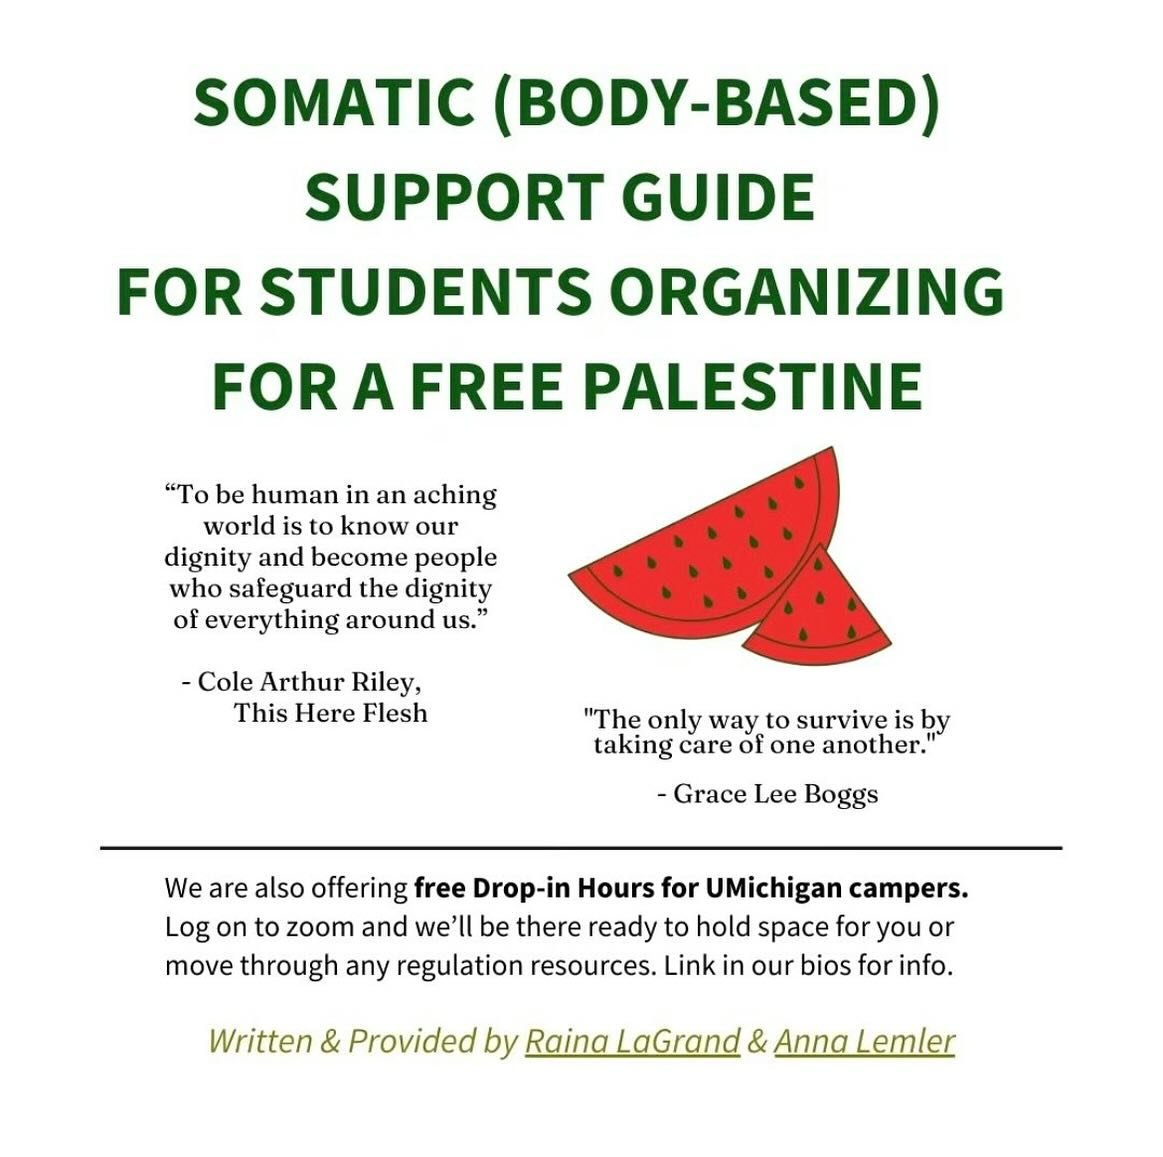 Thank you to @unfurlandrewild with @use.repost for this resource for students and all people organizing for justice in this moment.

#repost 
・・・
🍉 For all the students out there who are being so courageous and taking action for a free Palestine. Fe